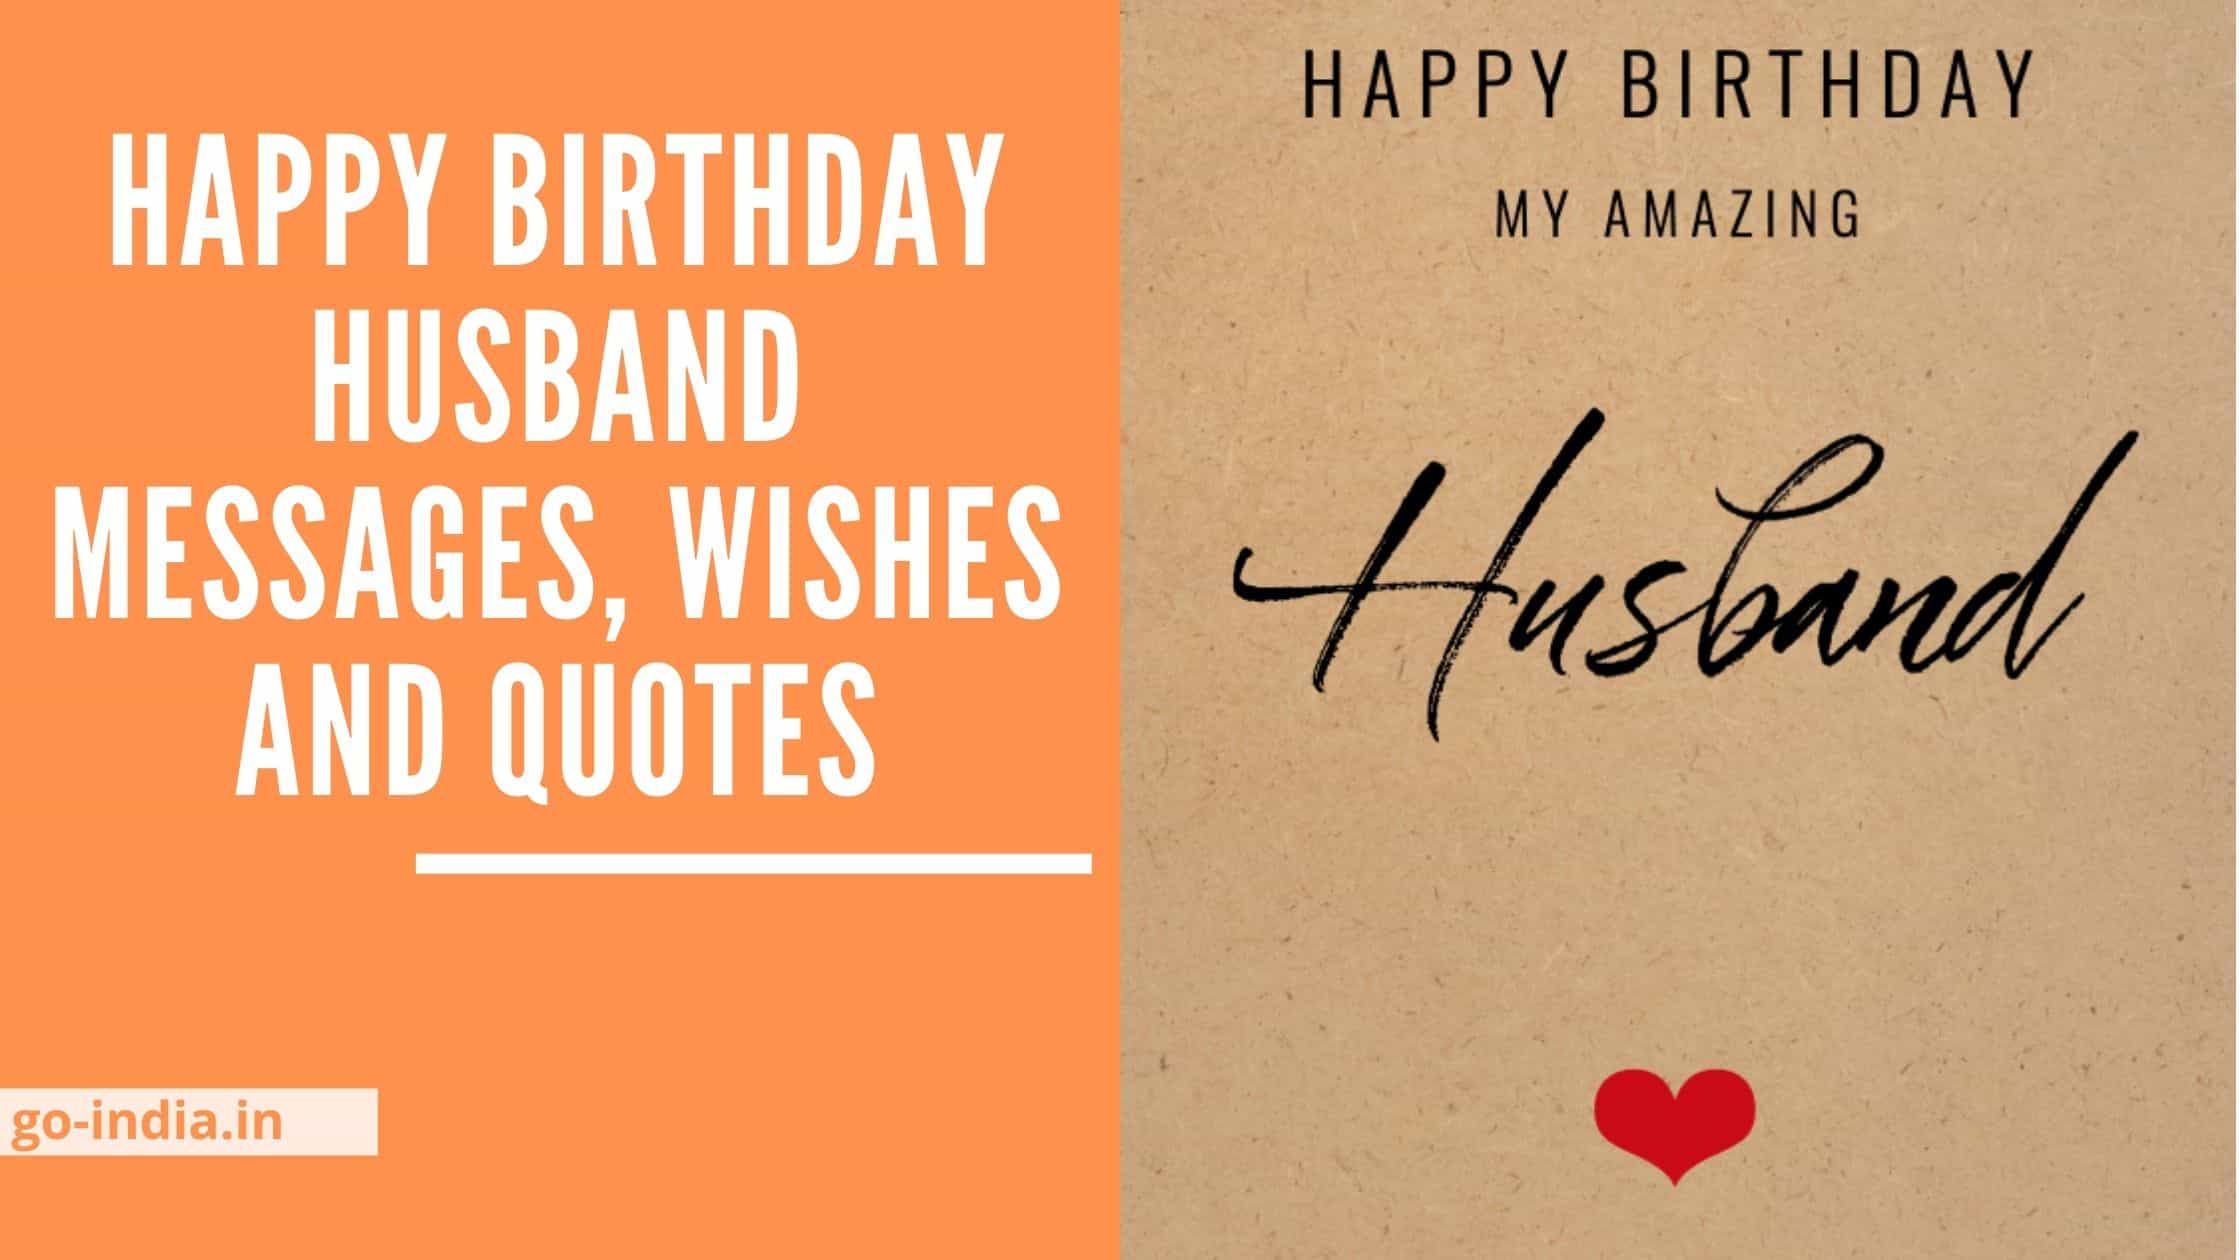 Happy Birthday Husband Messages, Wishes and Quotes